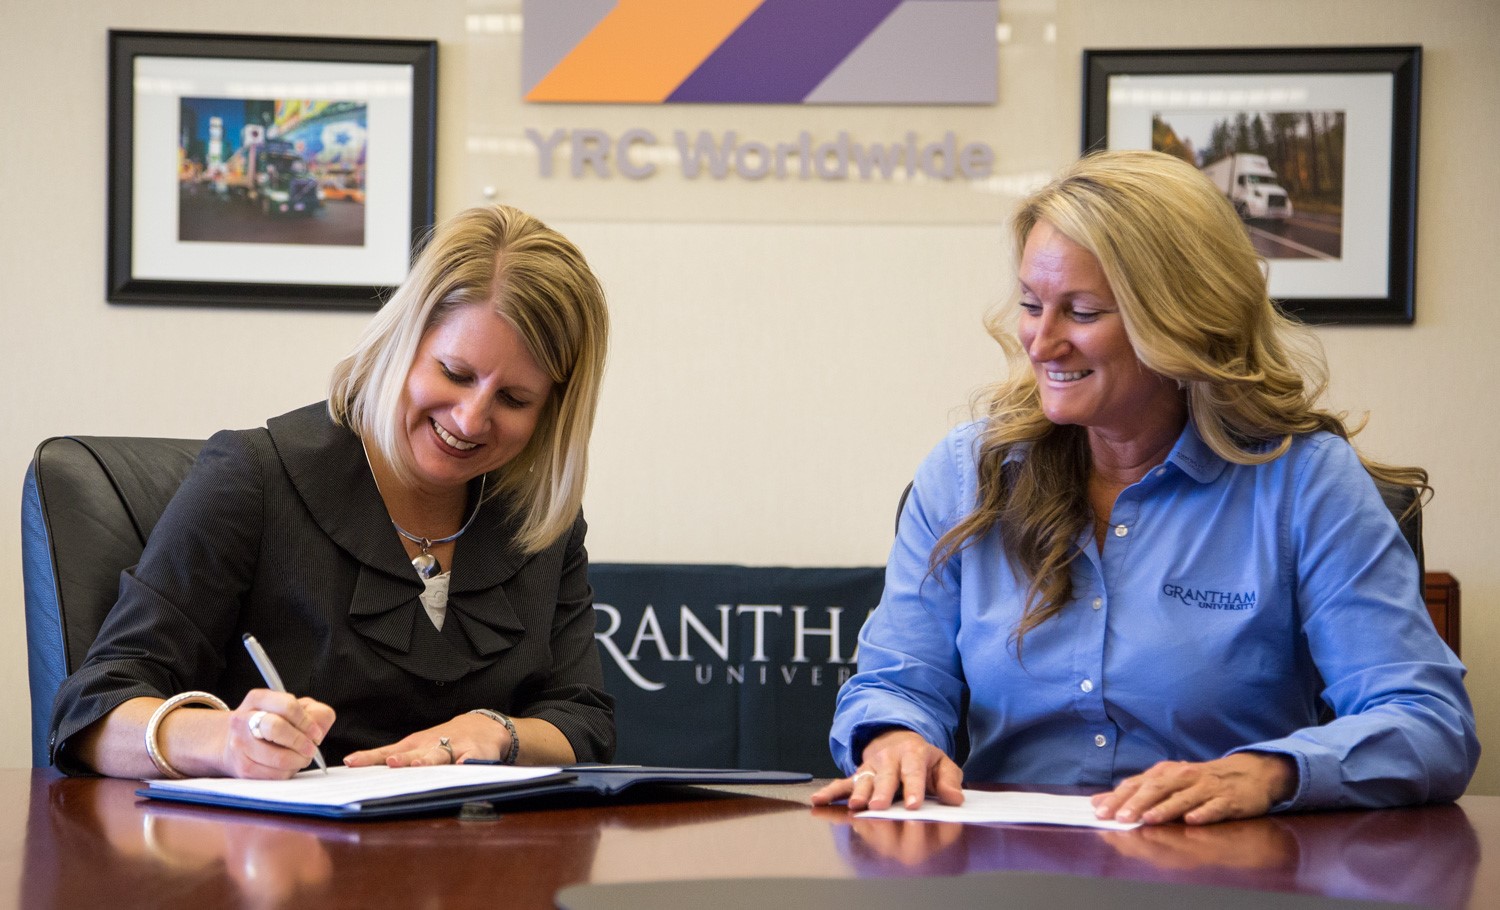 (L to R) Stephanie Fisher, YRC Worldwide Inc. vice president and controller, and Charlyne Valizan, Grantham University national accounts manager, sign a partnership agreement.